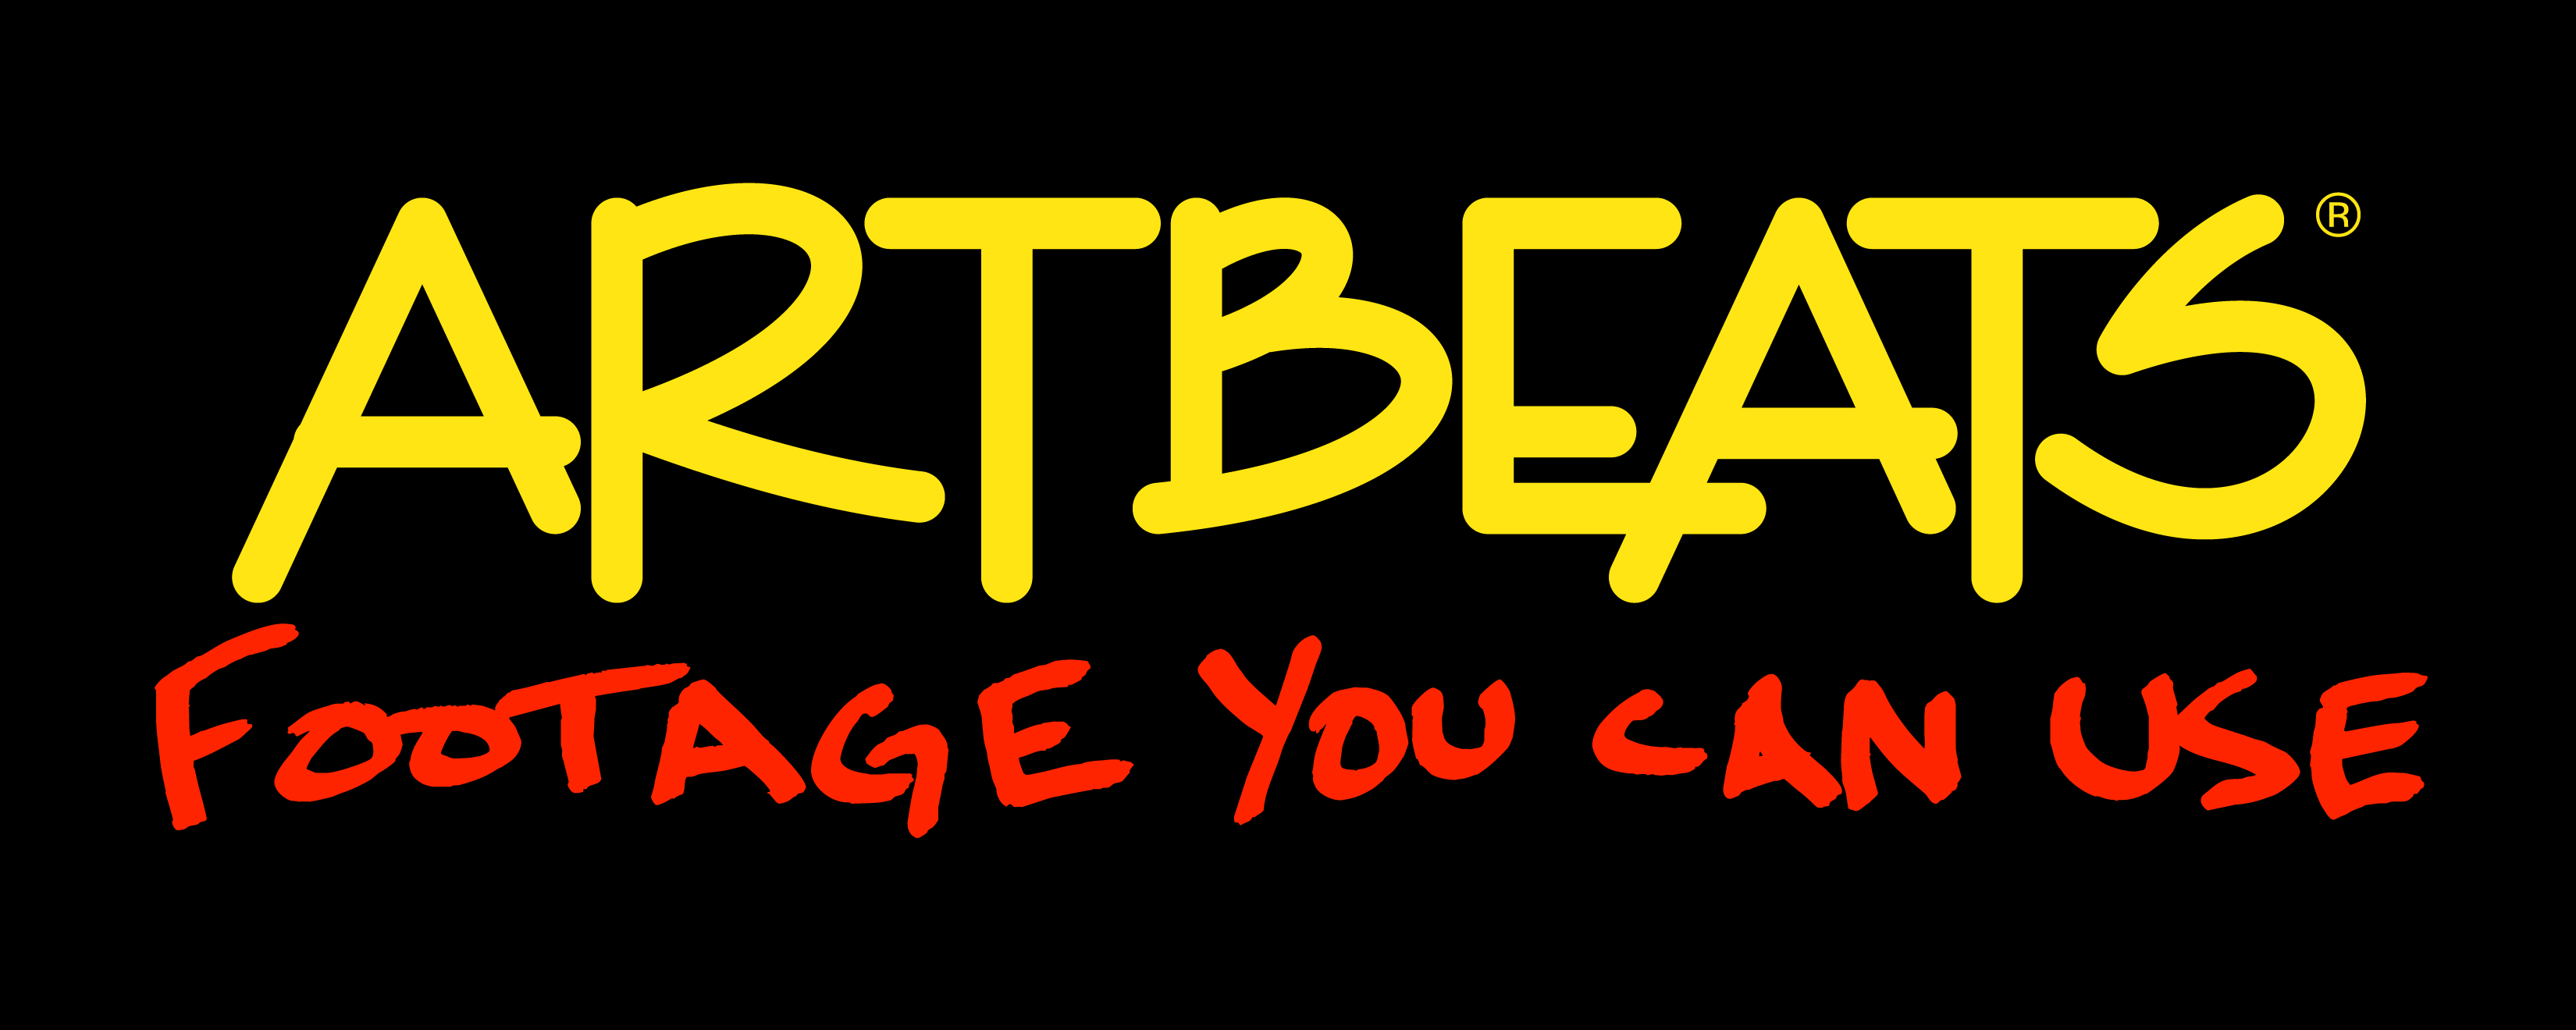 Artbeats Gives Customers Access to Free Premium Video Footage 29